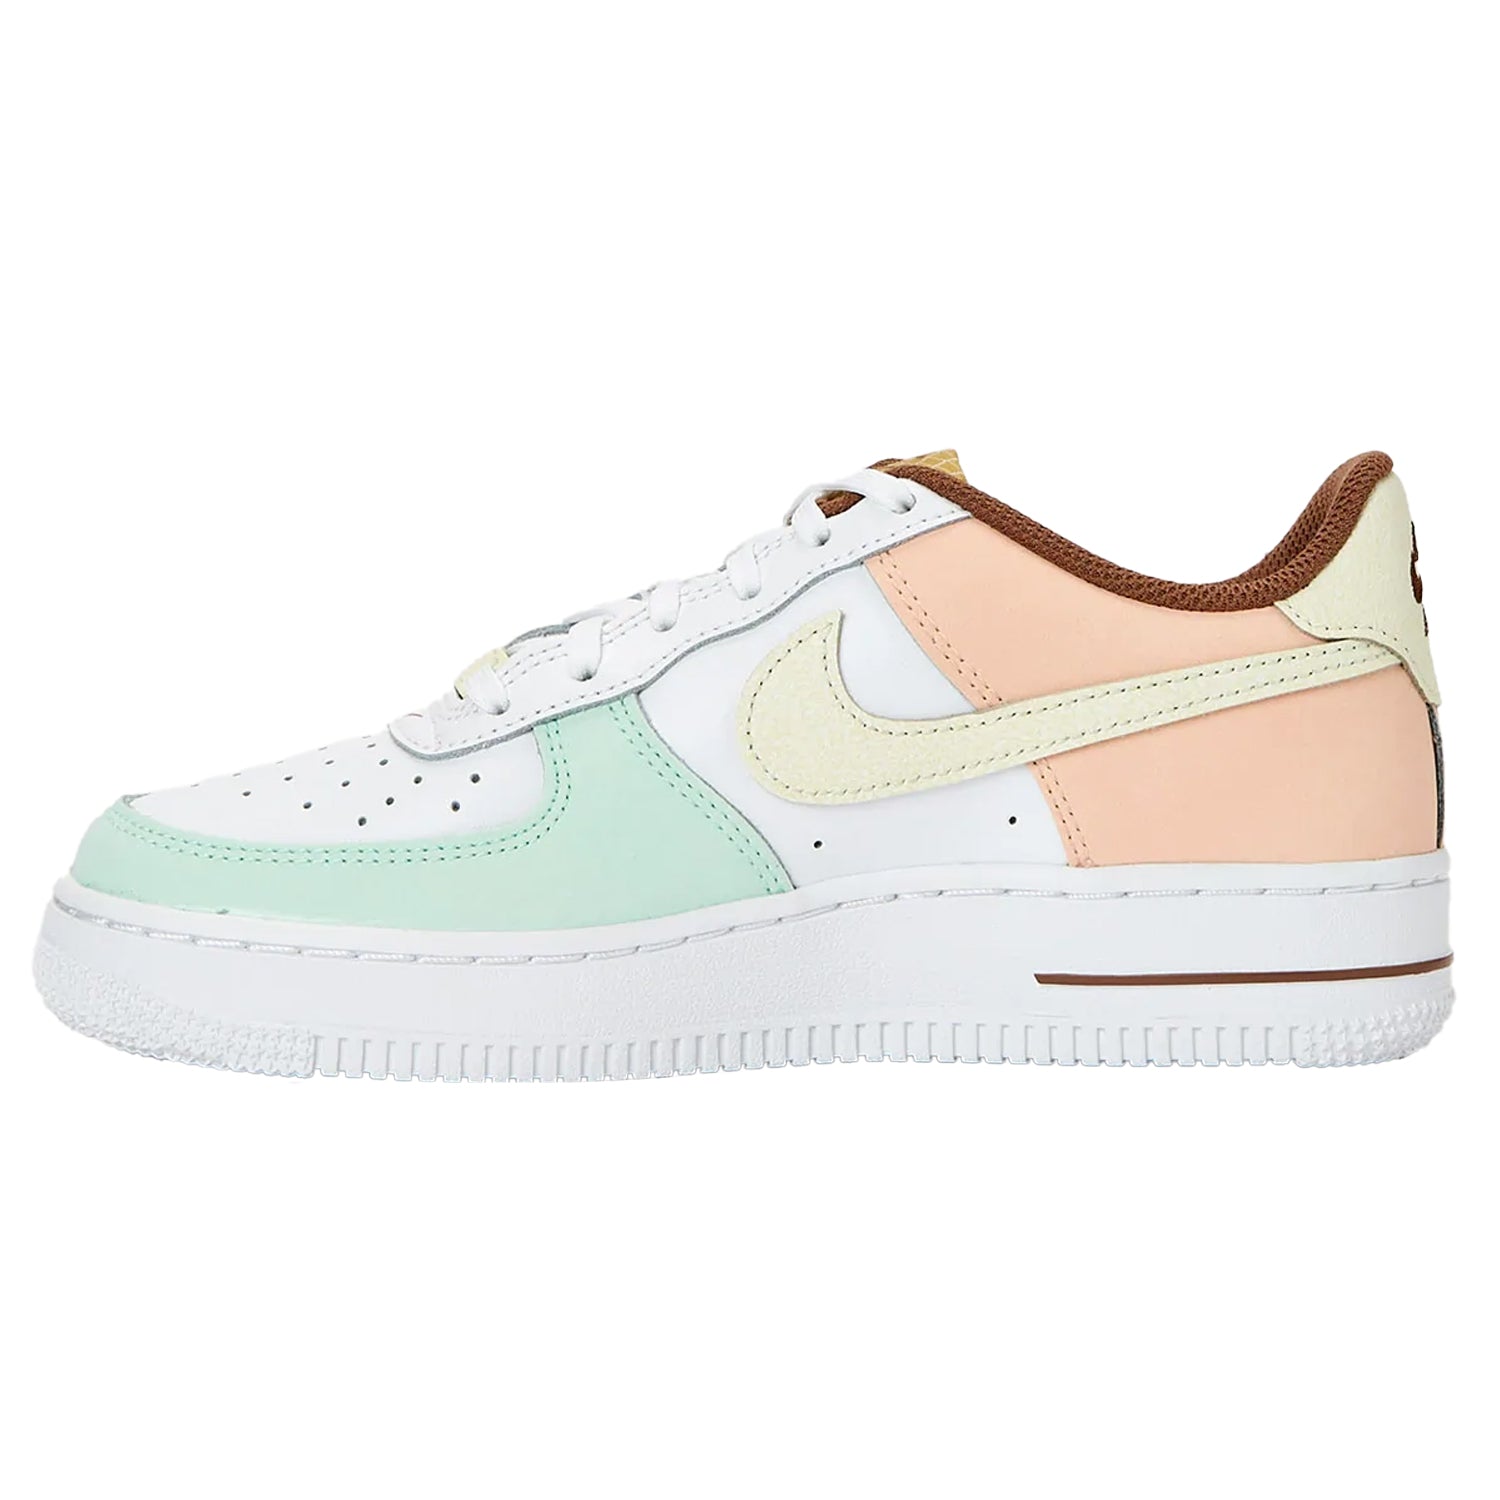 Nike Air Force 1 Low LV8 Ice Cream (GS)